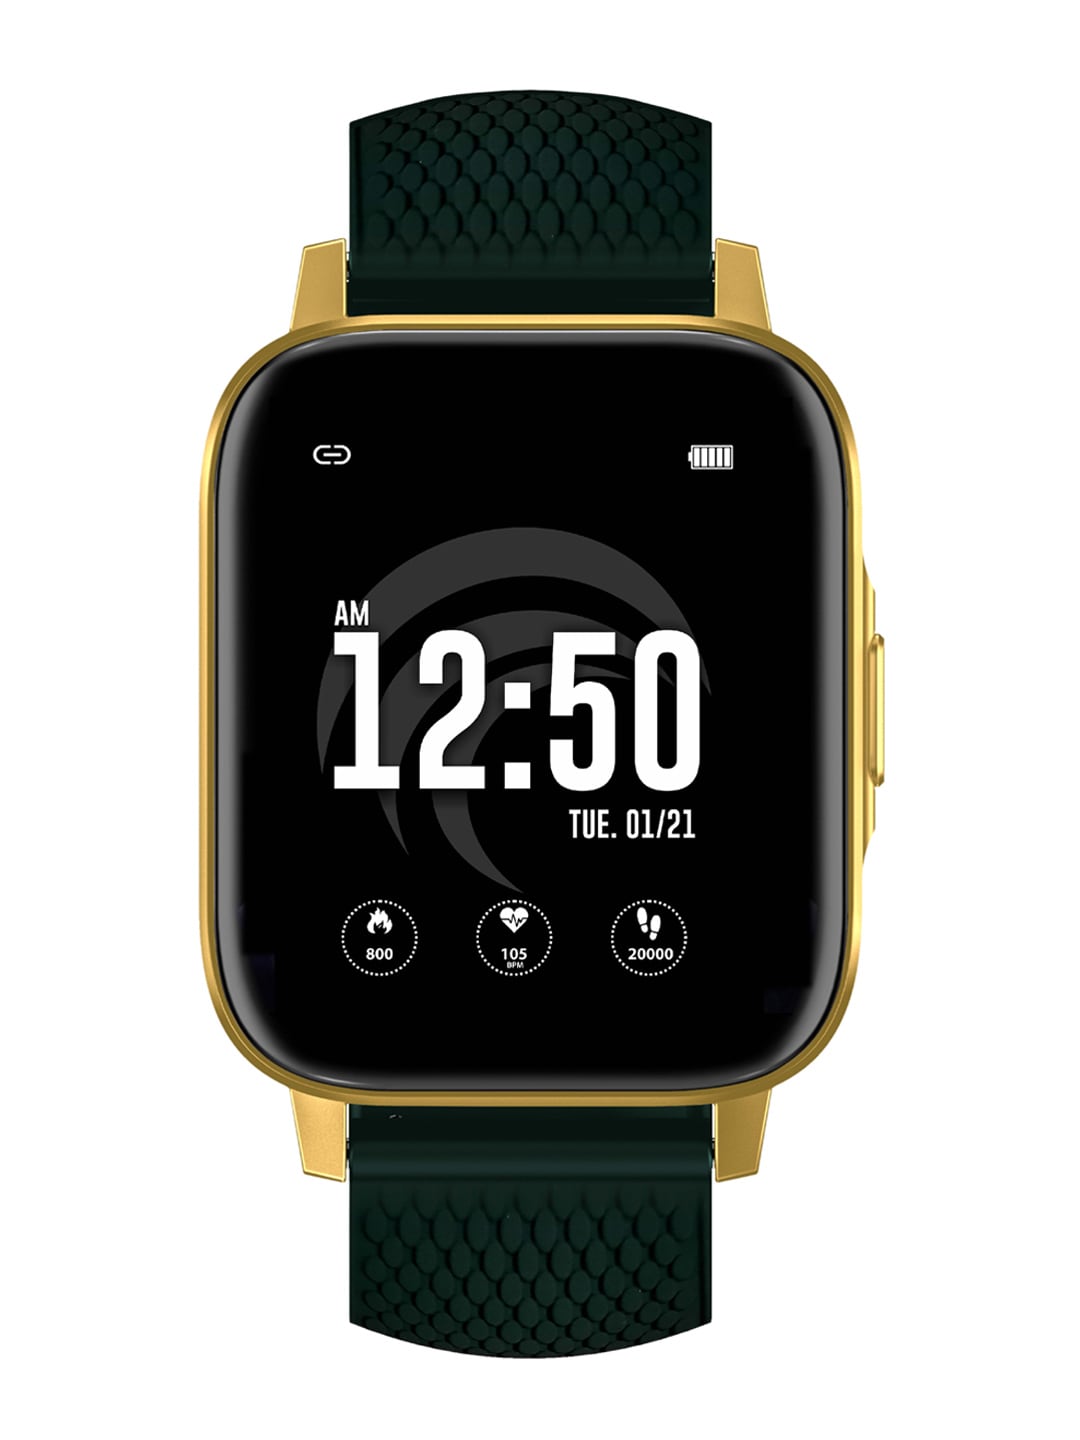 Cellecor Gold ActFit A1 Pro SpO2 IP68 Waterproof Smartwatch Price in India